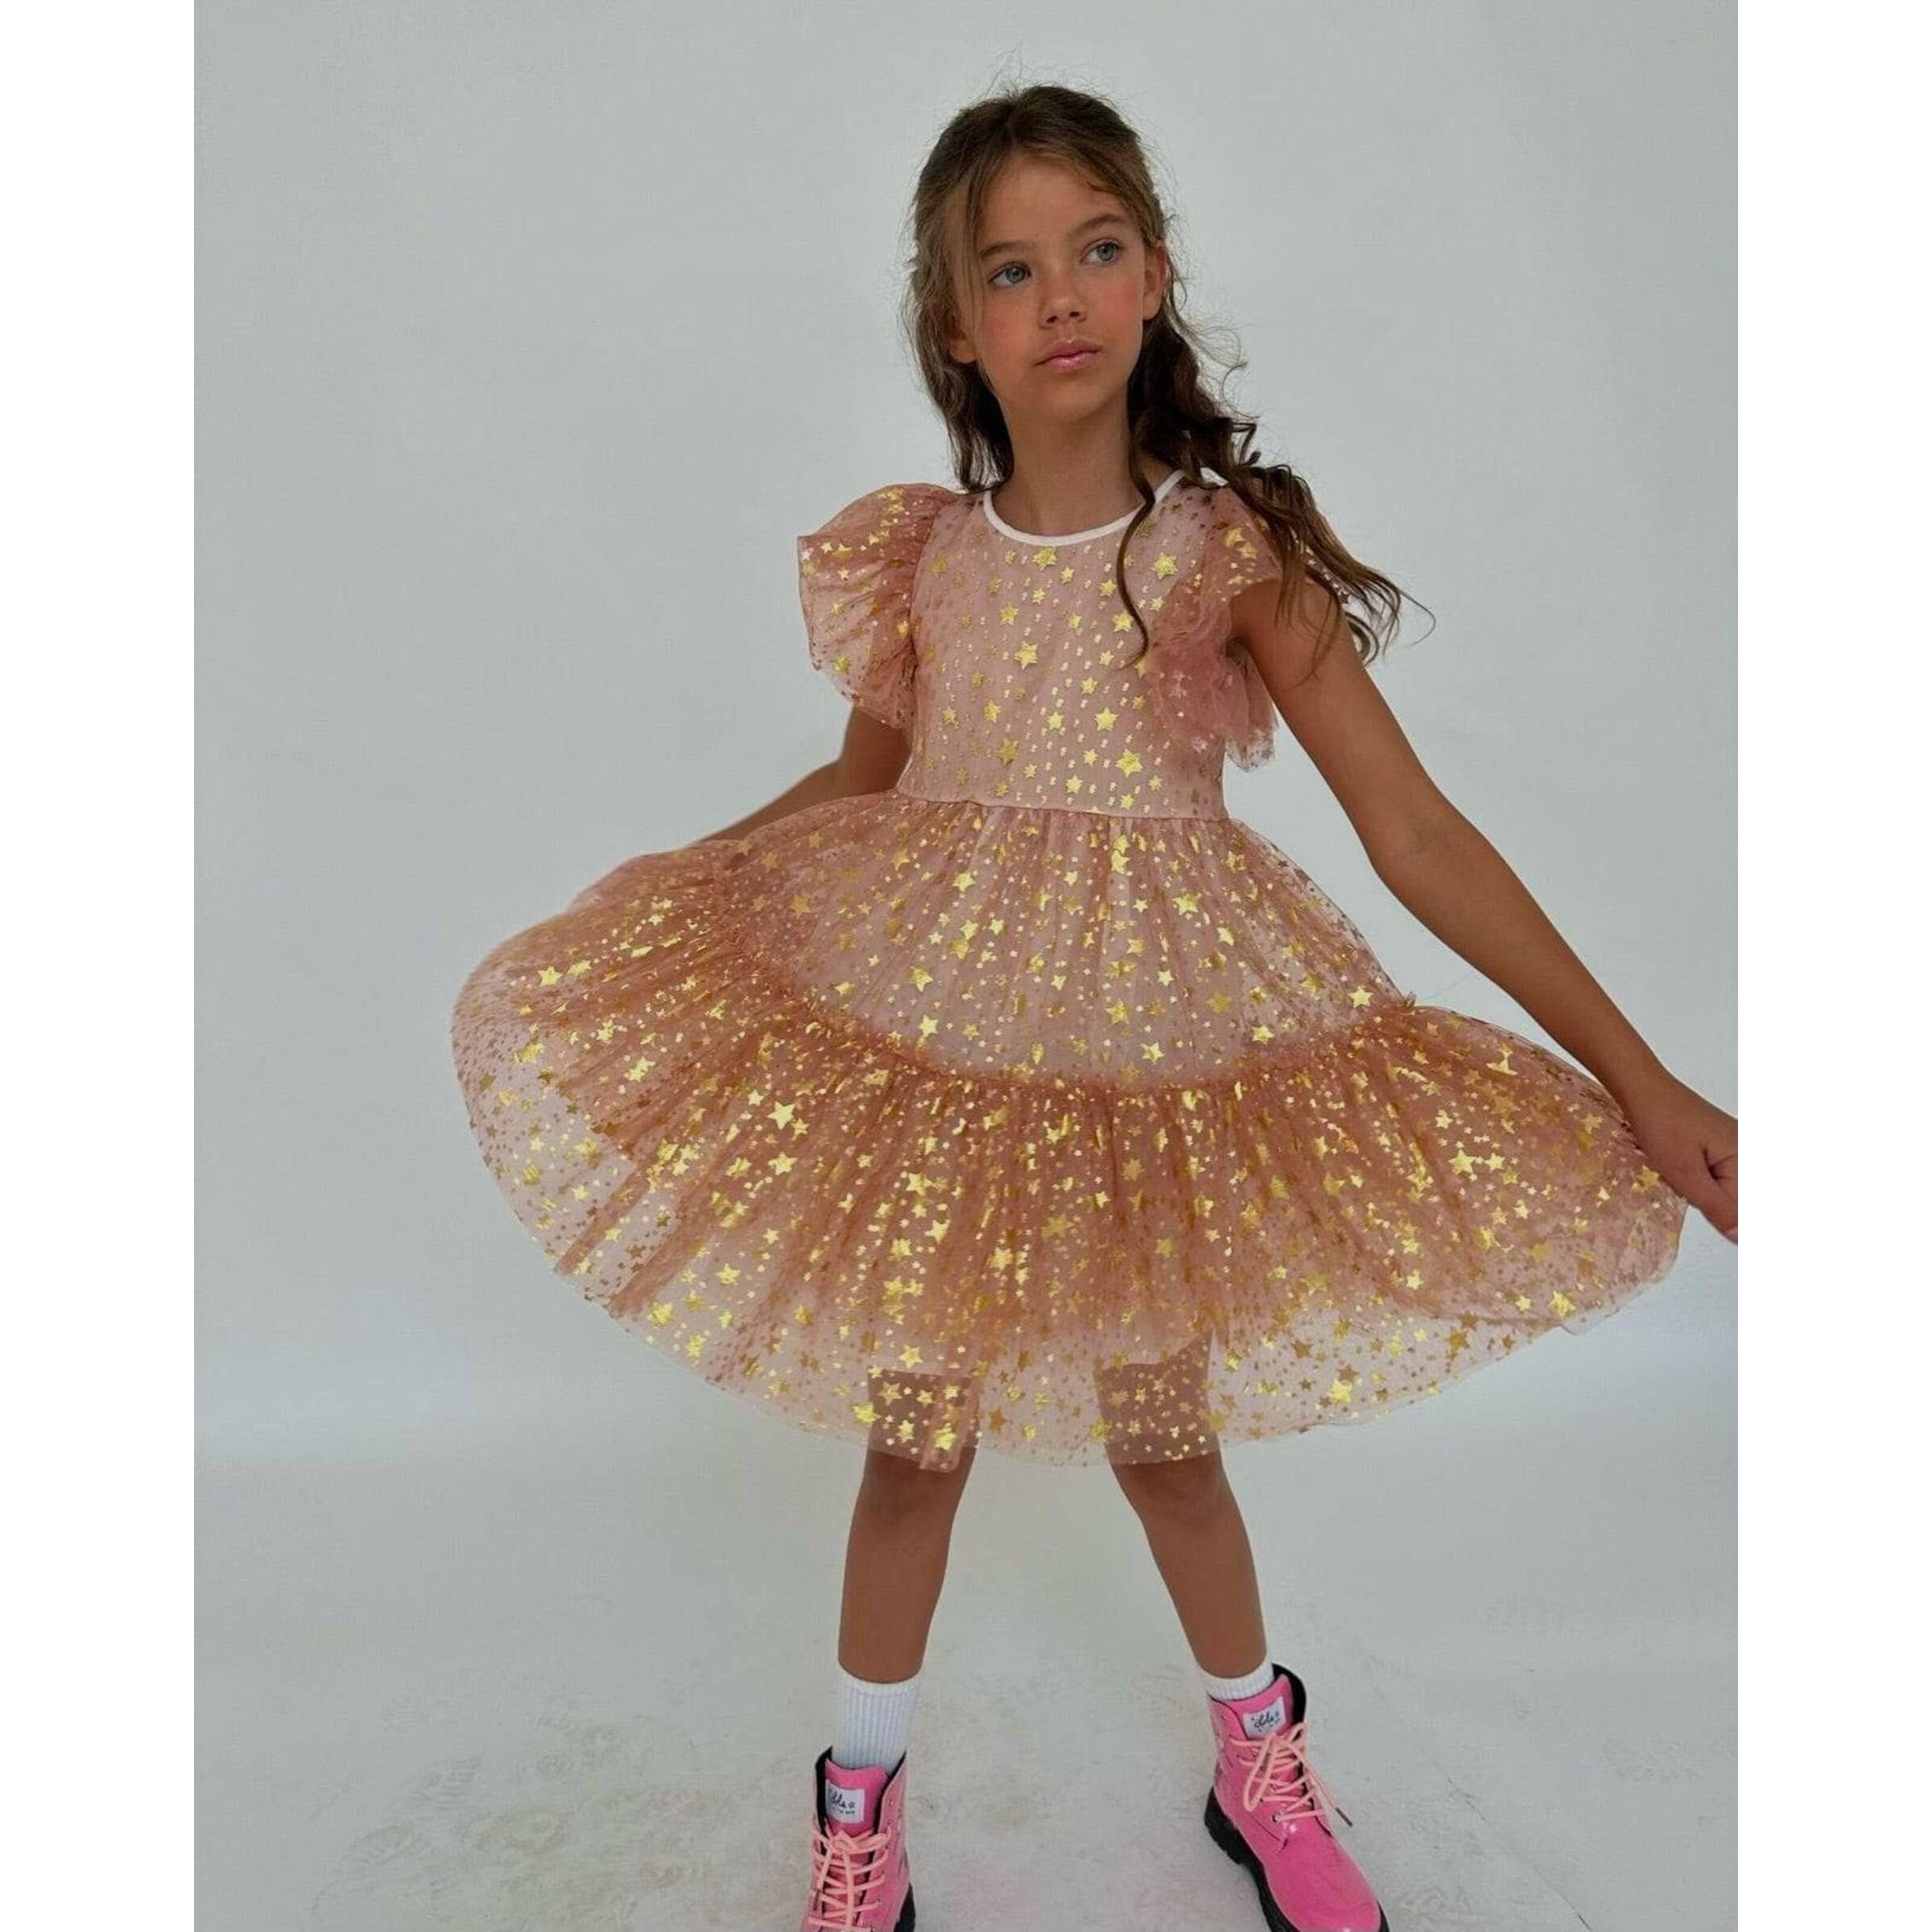 girl wearing blush colored tulle dress covered in gold metallic stars